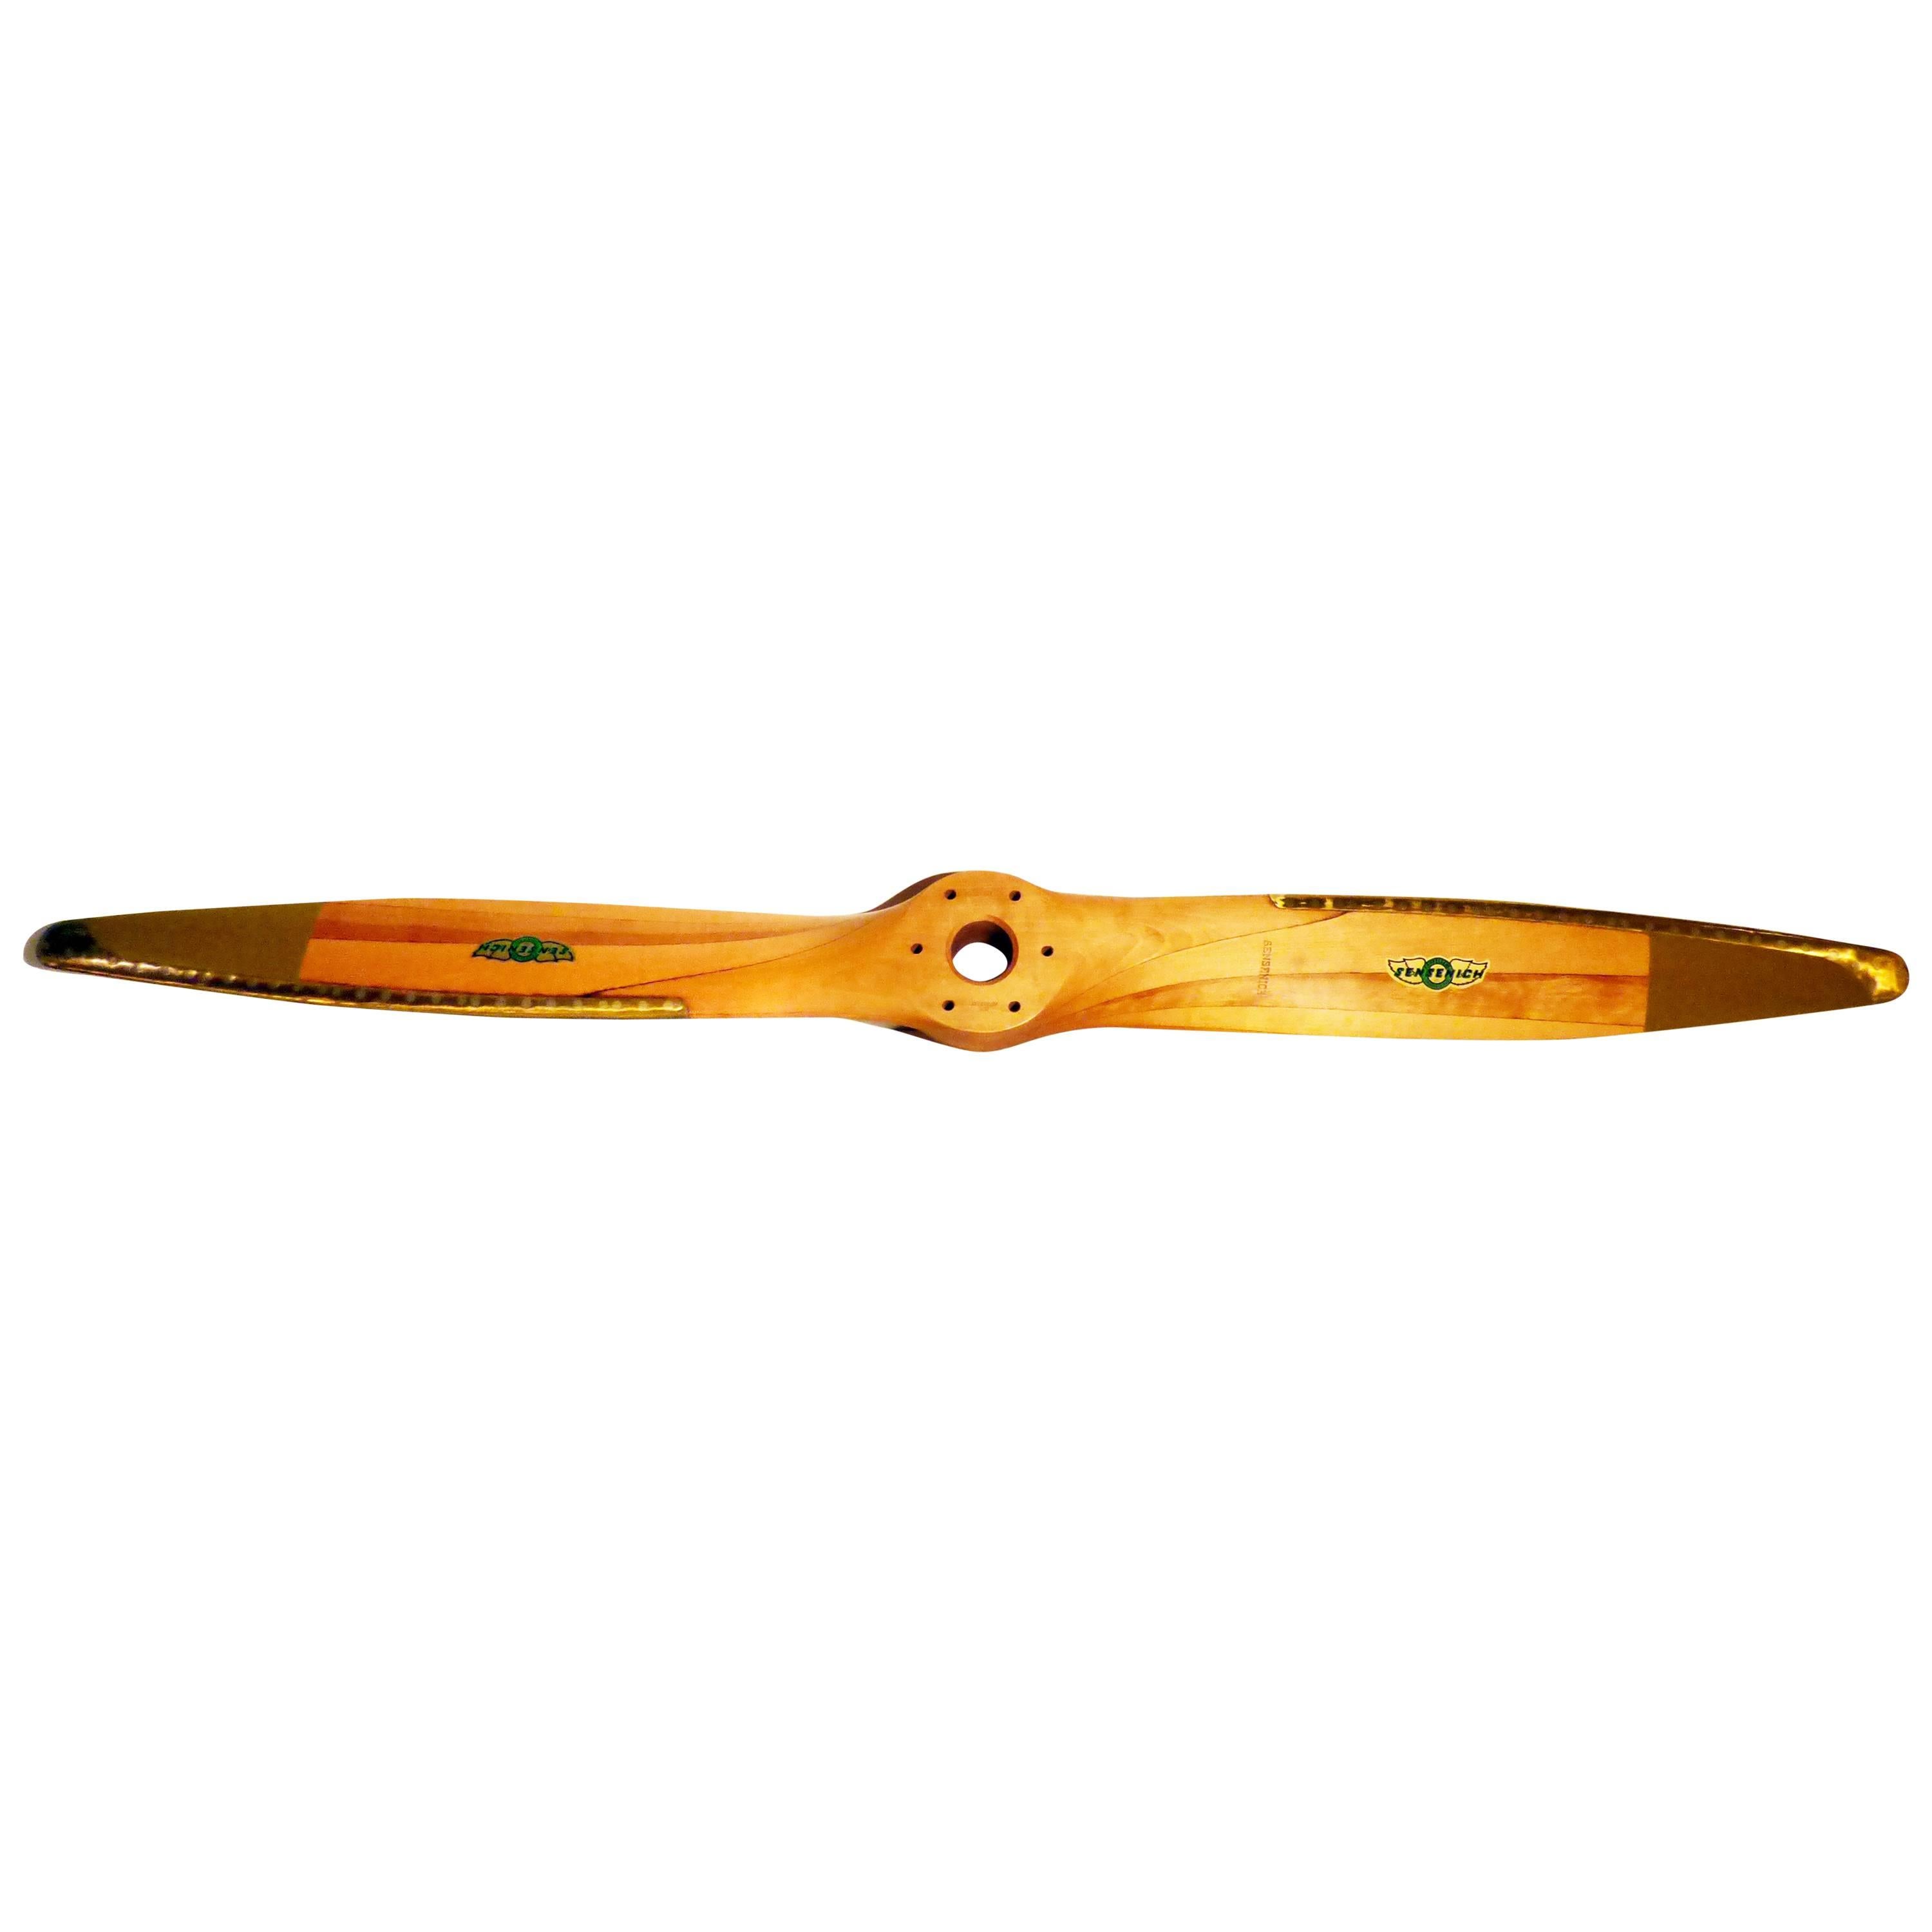 Classic 1940s Sensenich Propeller Wooden for Aviation or Planes For Sale